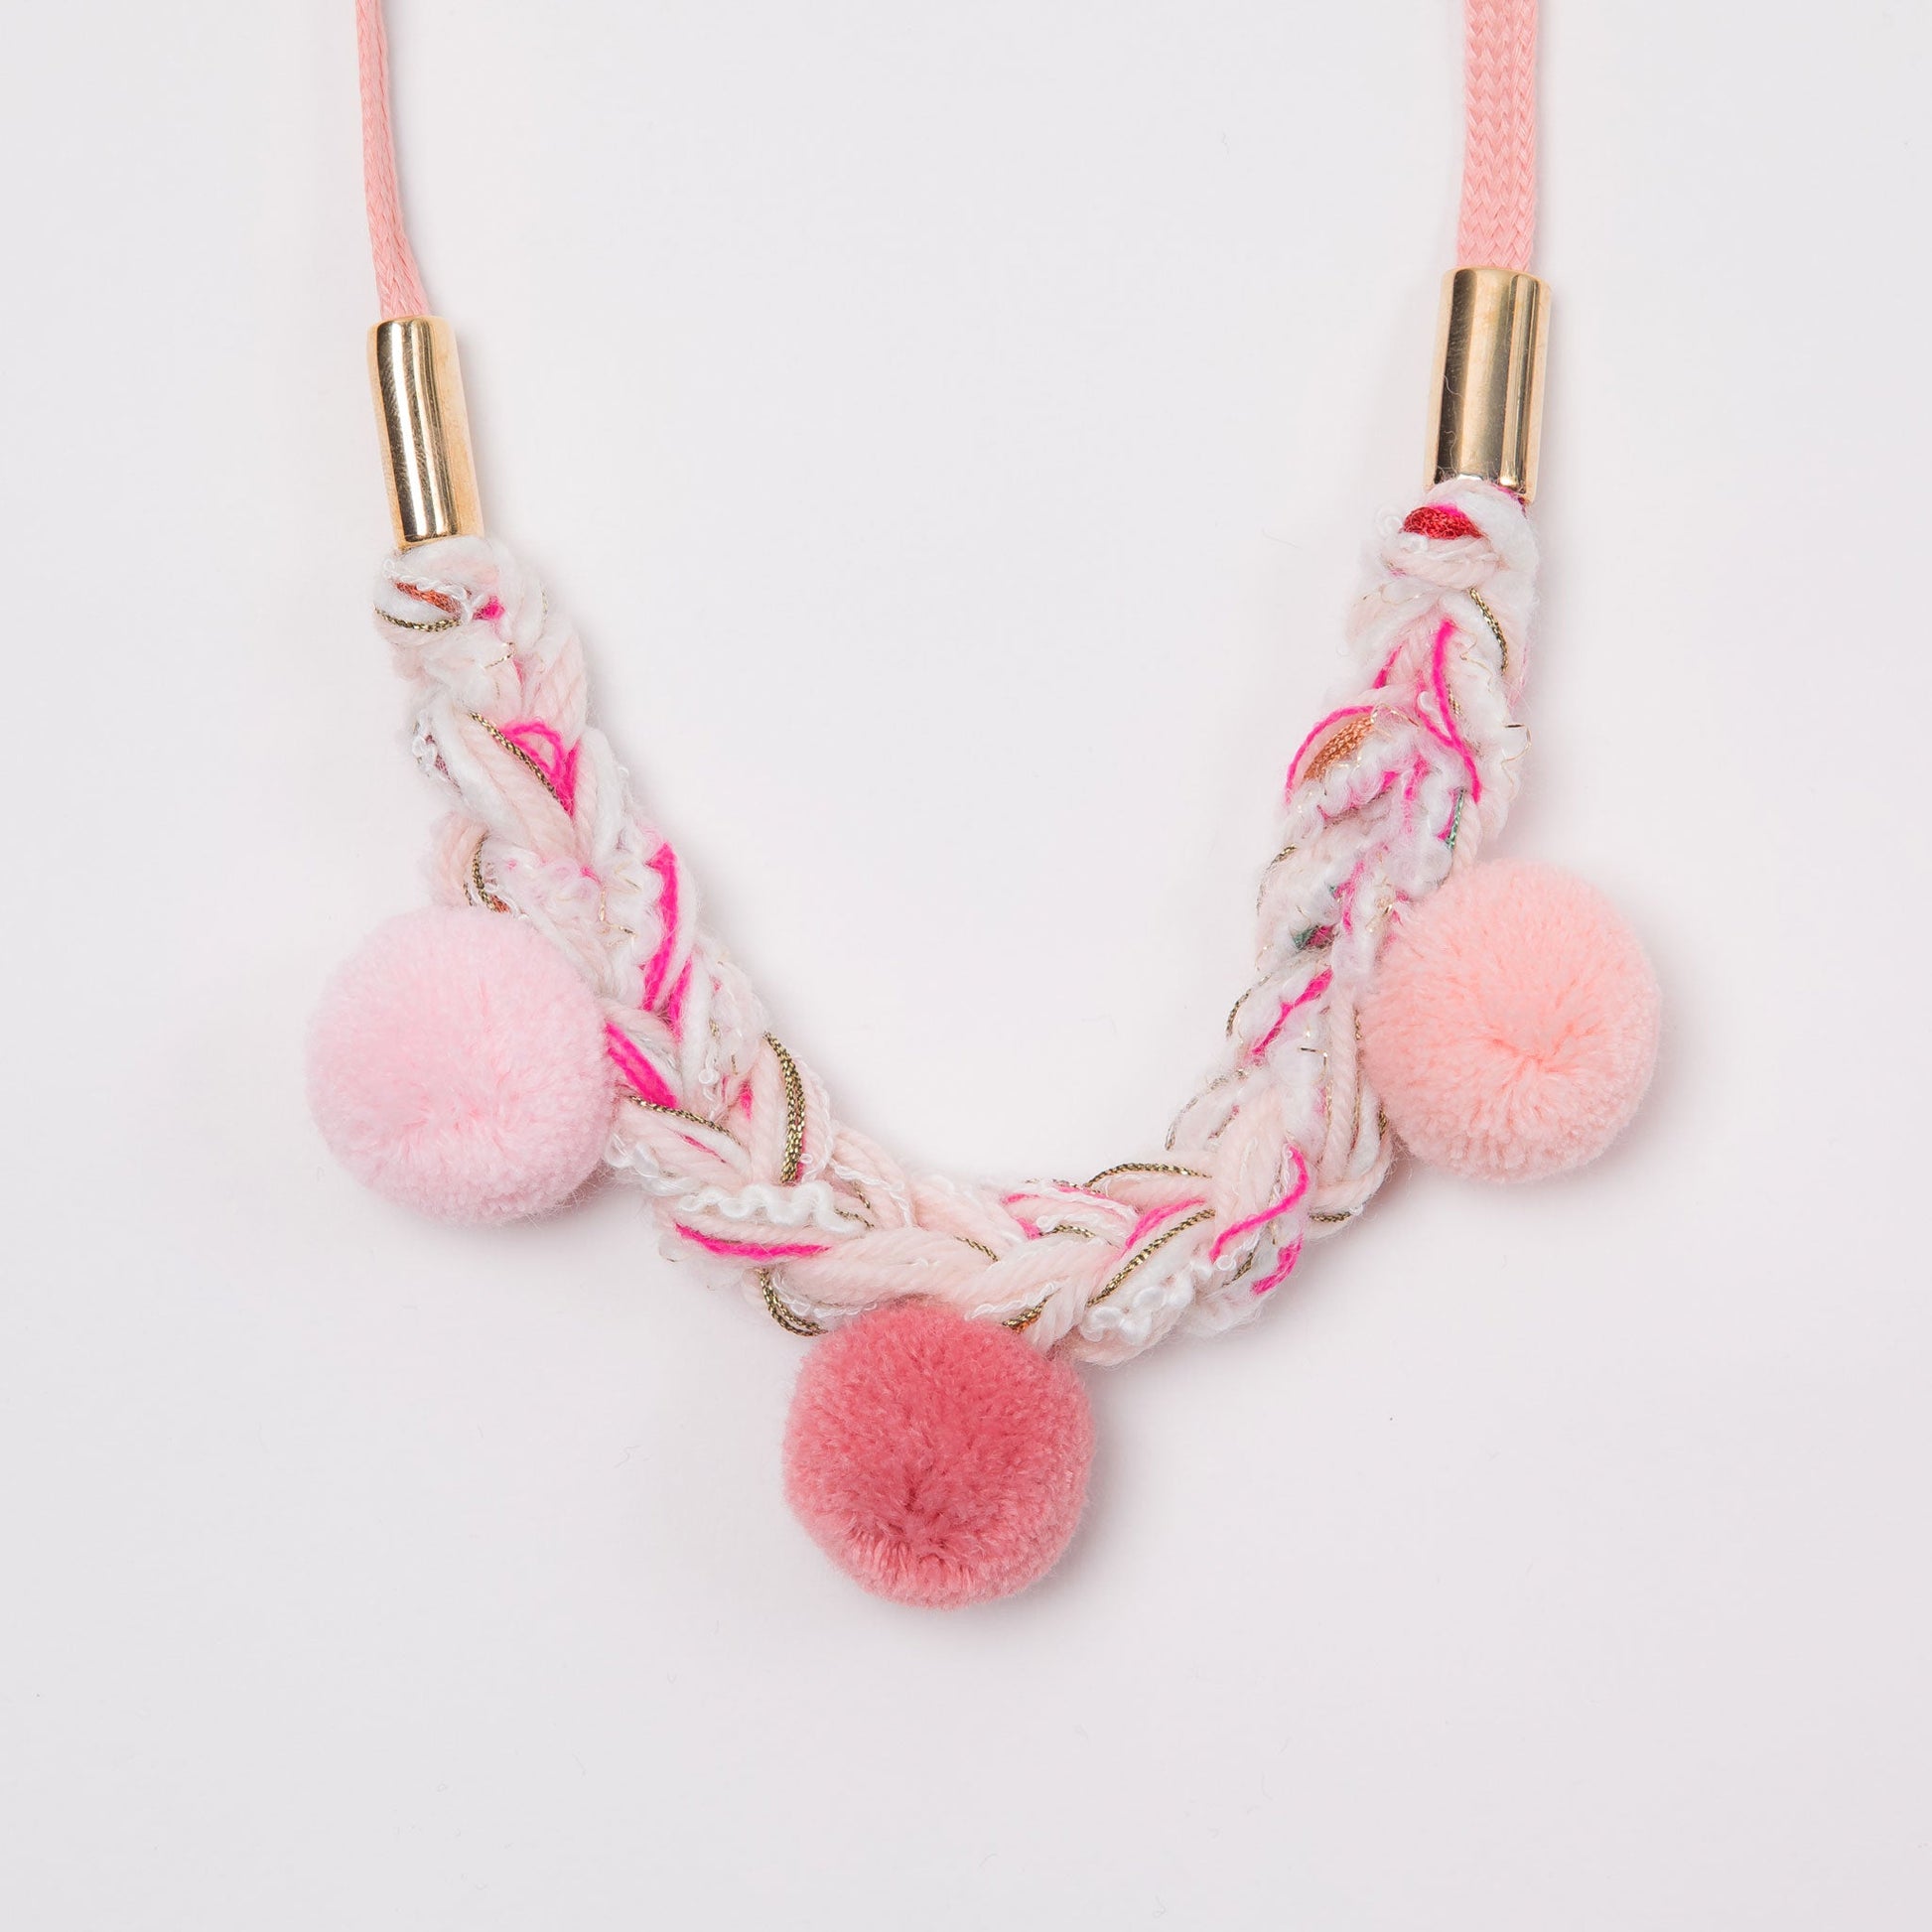 pom pom knit necklace for little girls pink and white detail